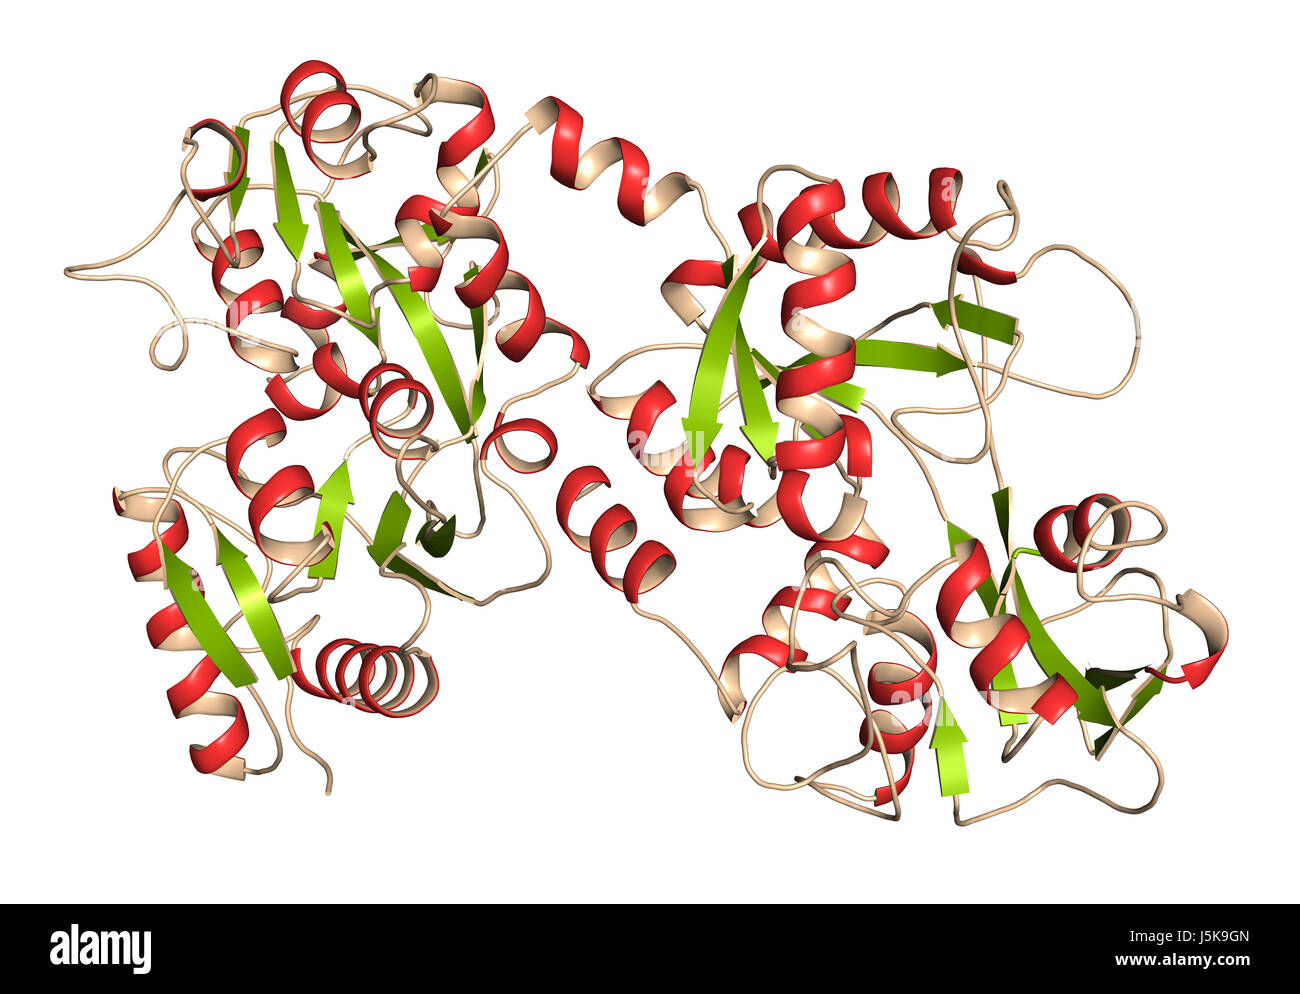 Lactoferrin protein. Lactoferrin is an iron-binding protein that is part of the innate immune system. Stock Photo